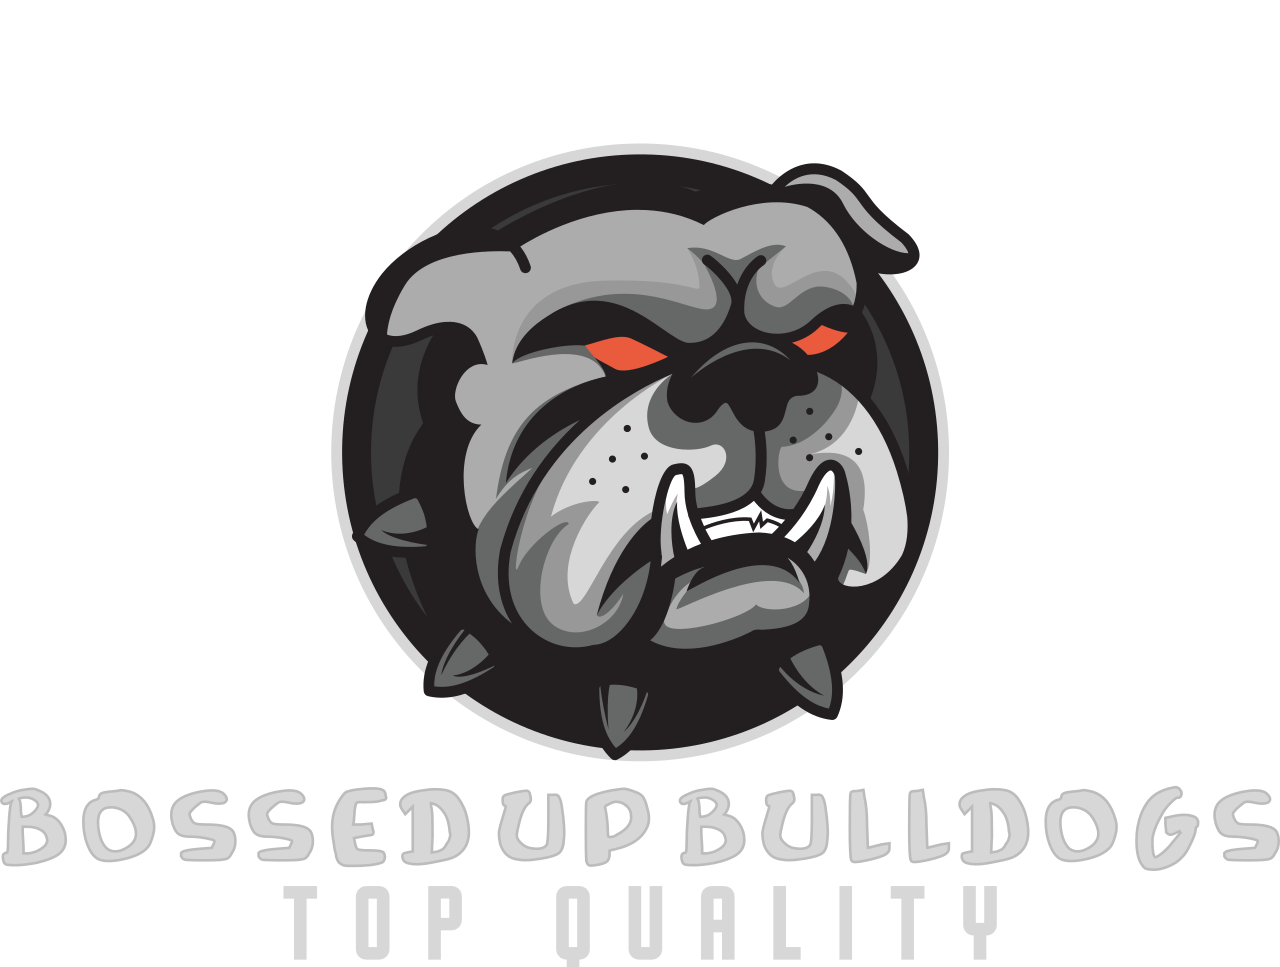 BOSSED UP BULLDOGS's web page